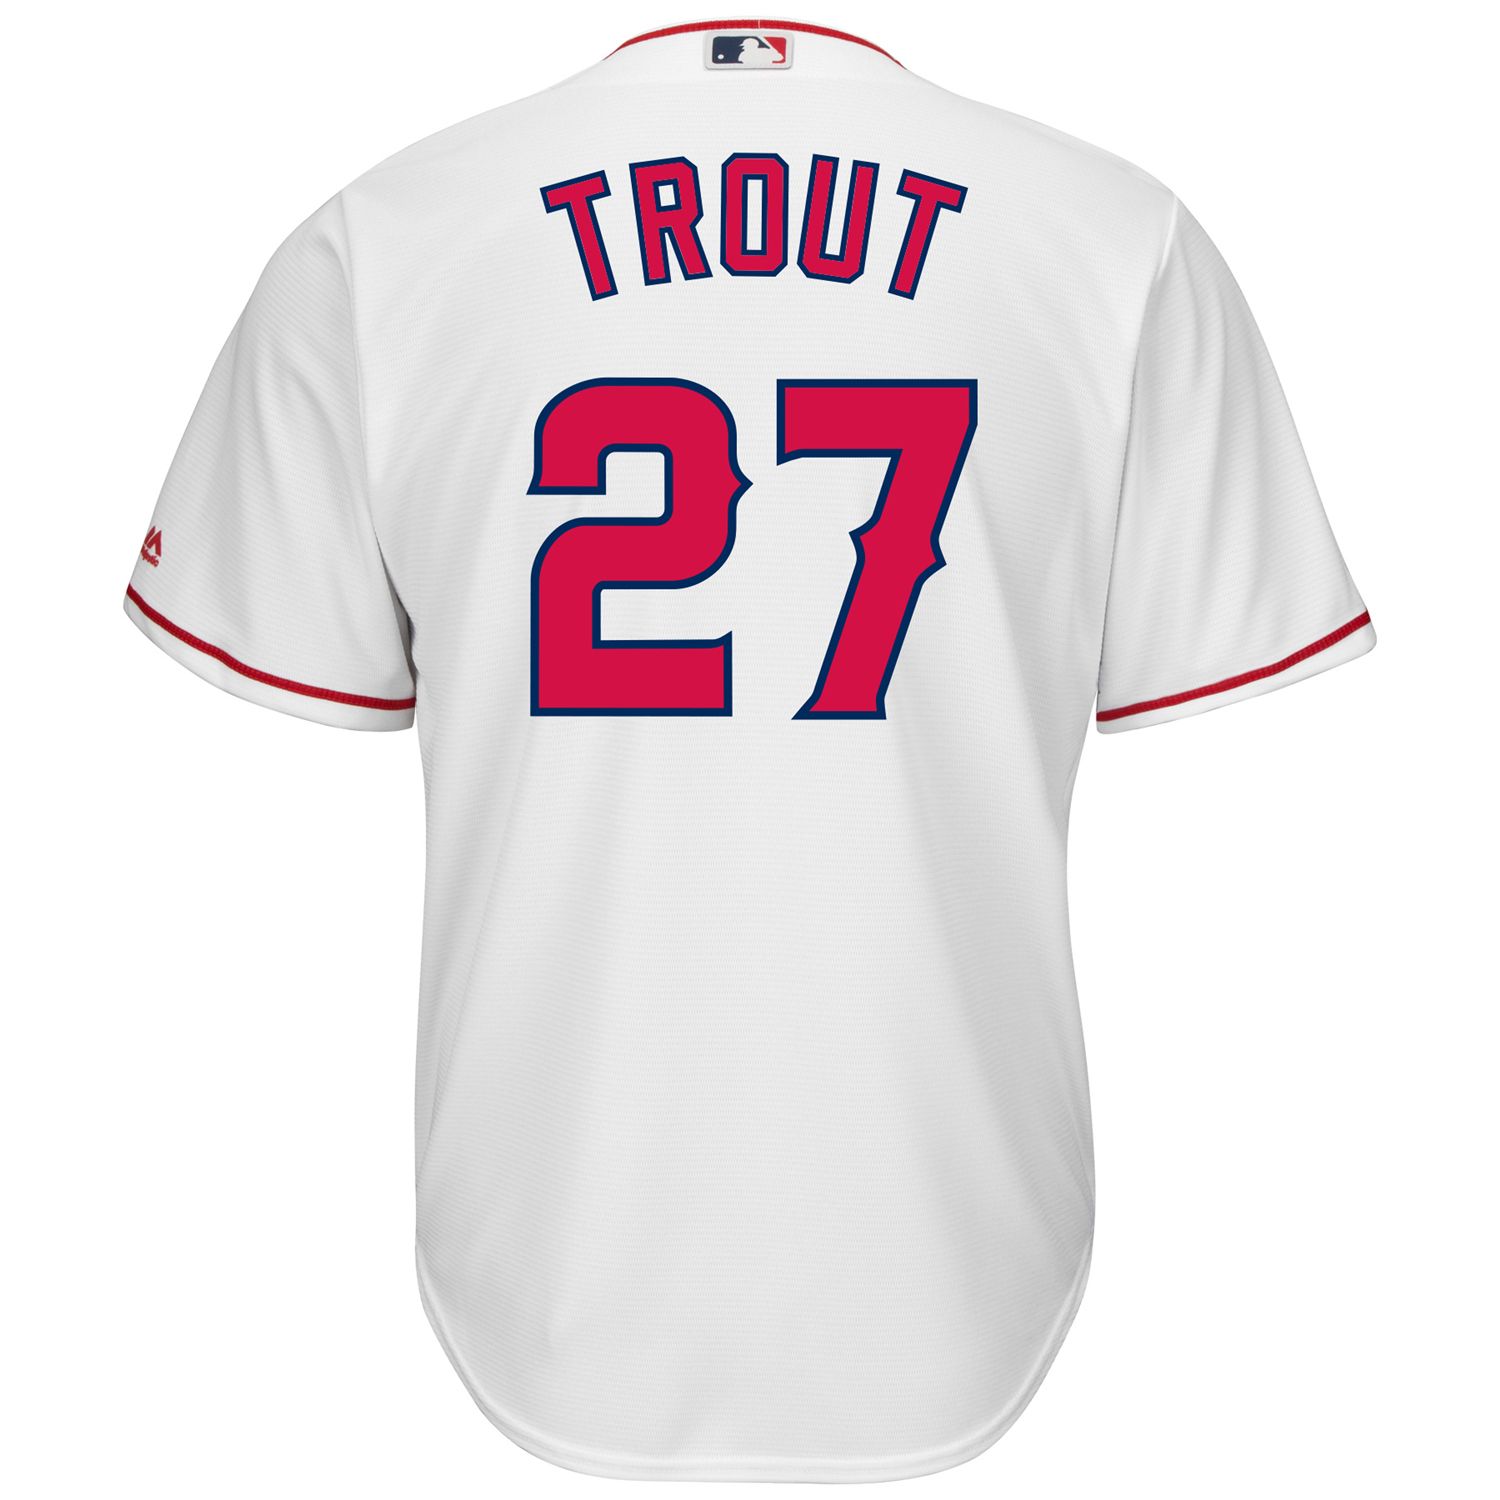 mike trout majestic jersey